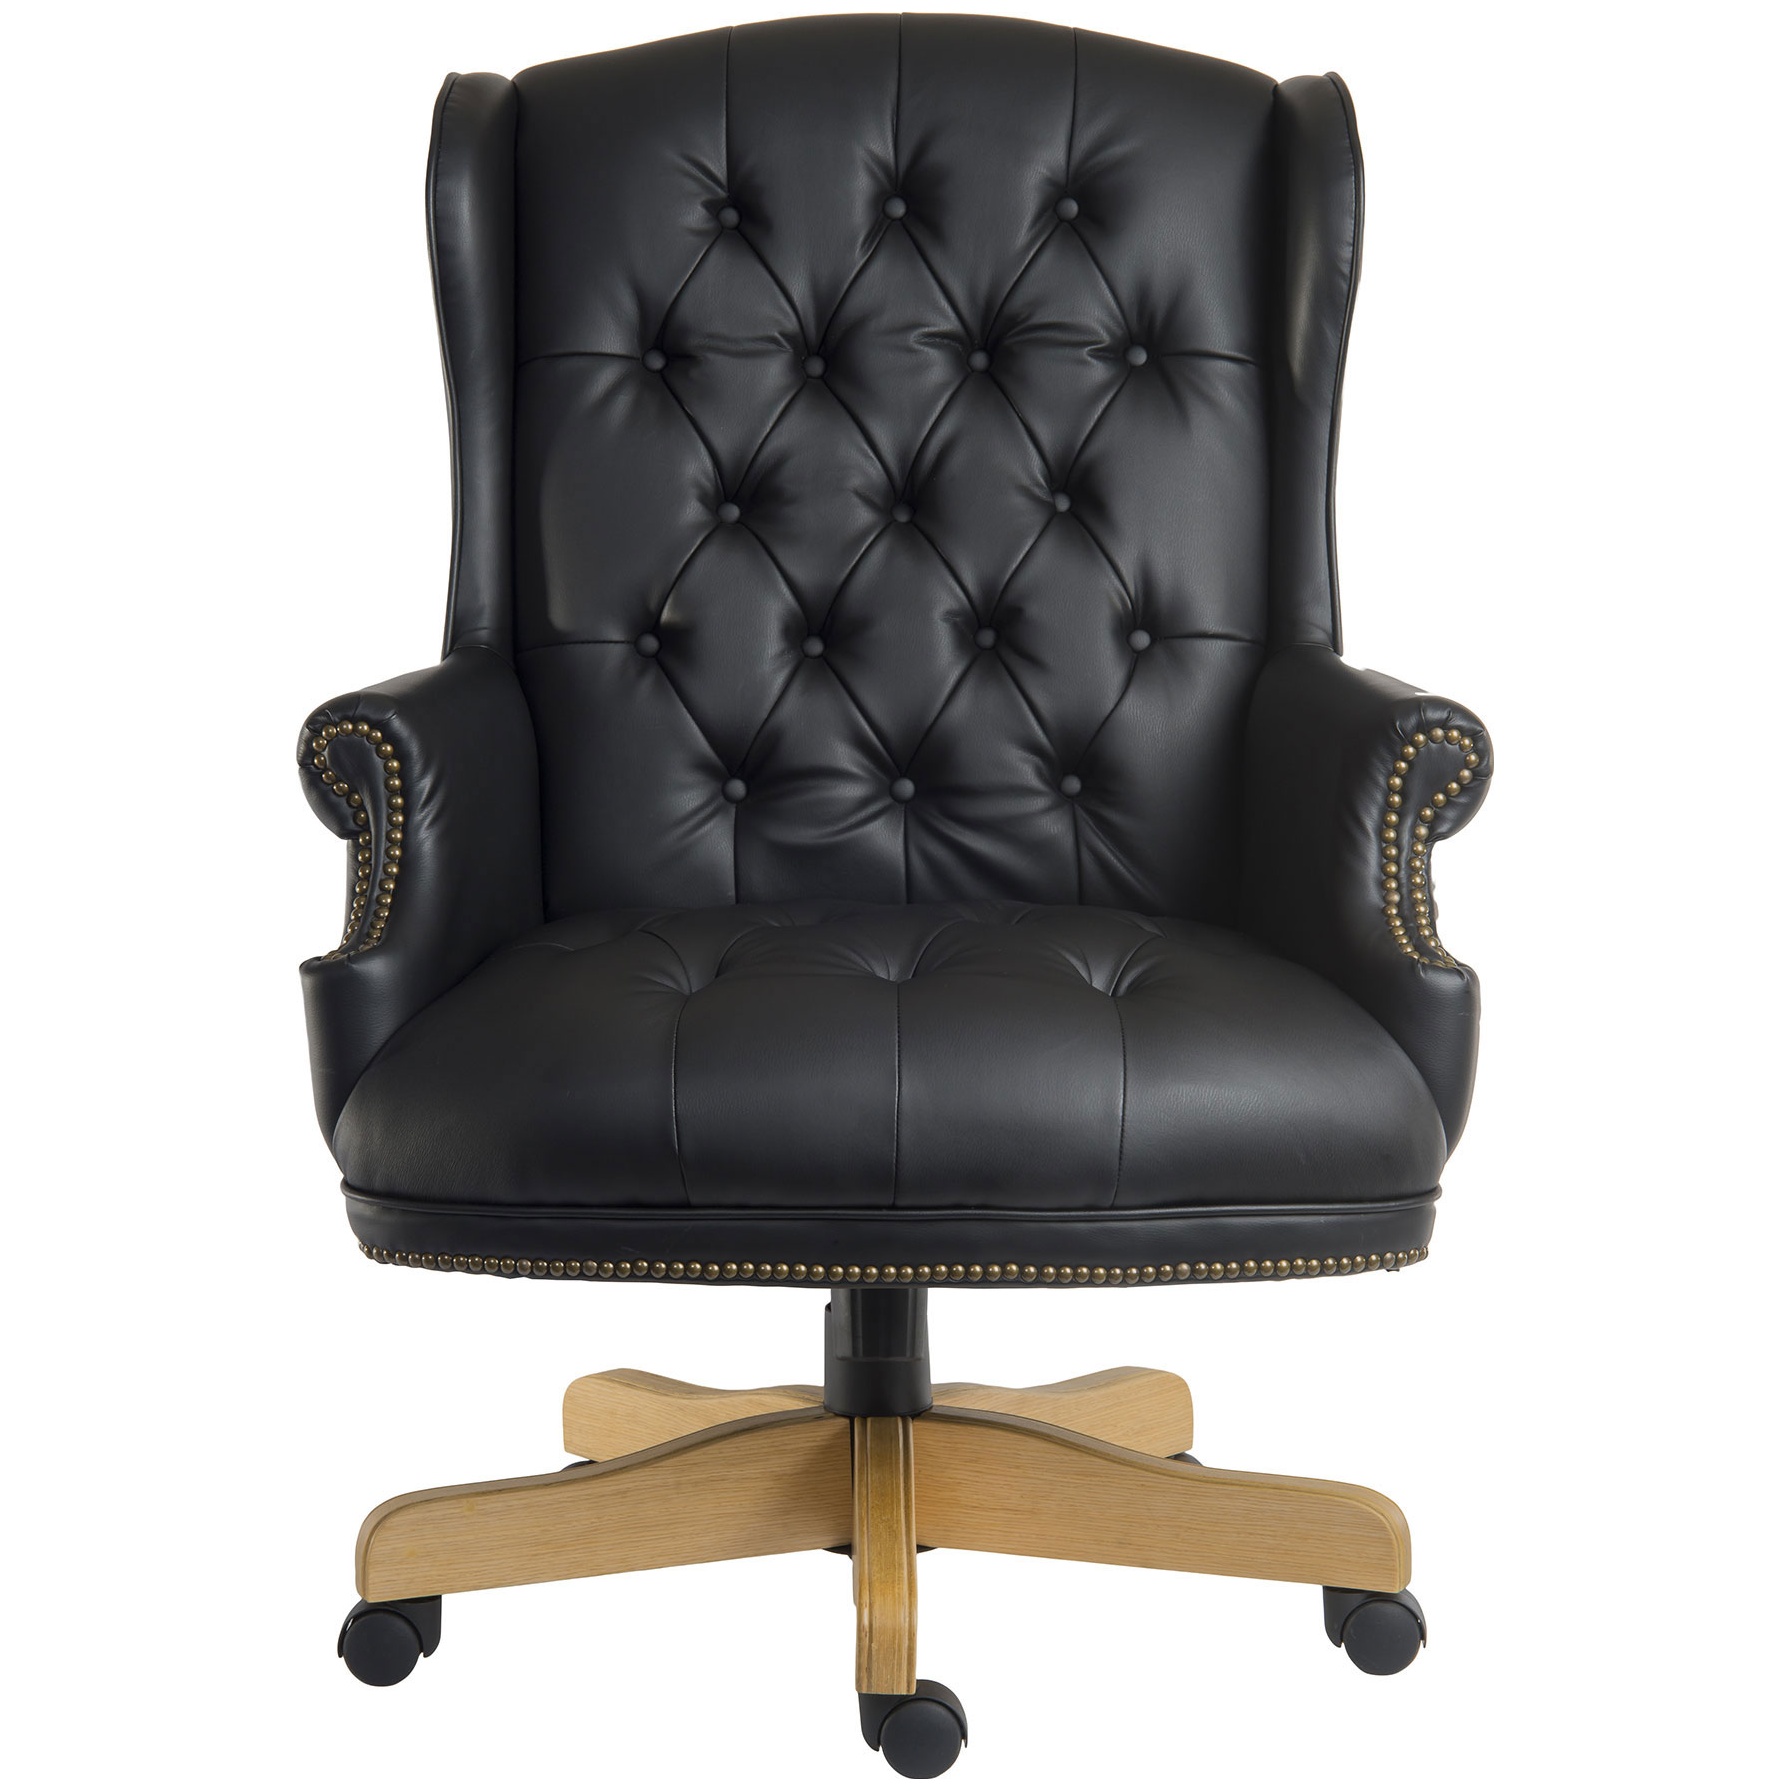 Chairman Noir Traditional Manager Chair